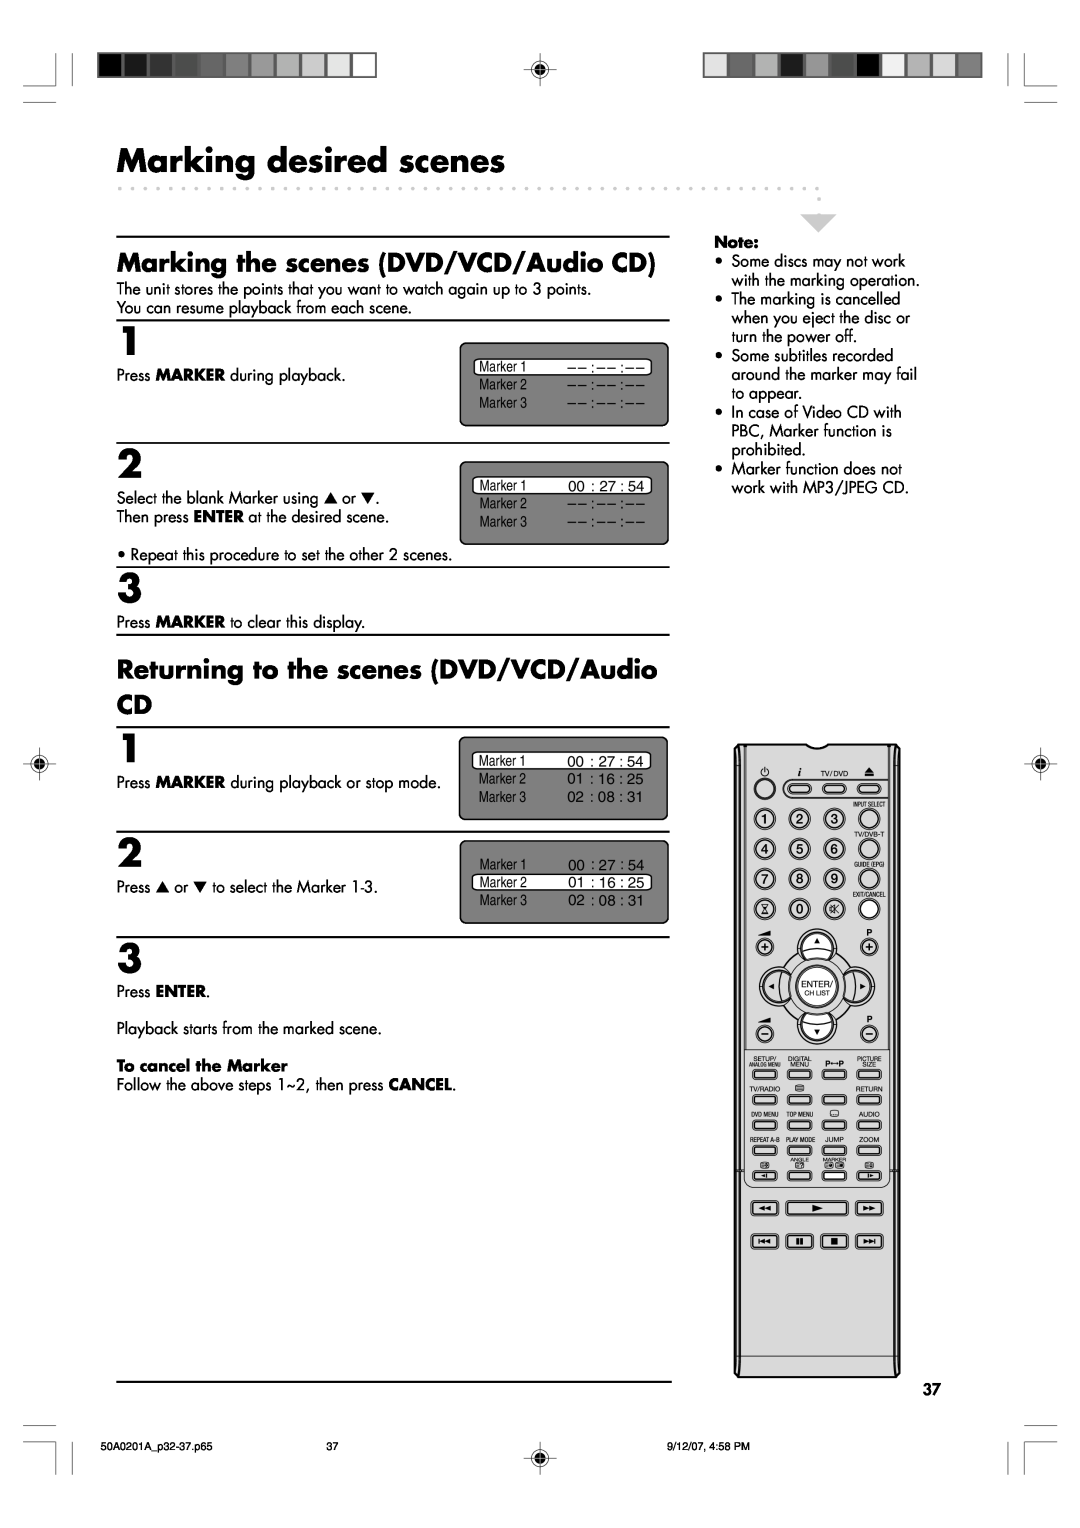 Sansui TV19PL120DVD Marking desired scenes, Marking the scenes DVD/VCD/Audio CD, Returning to the scenes DVD/VCD/Audio CD 